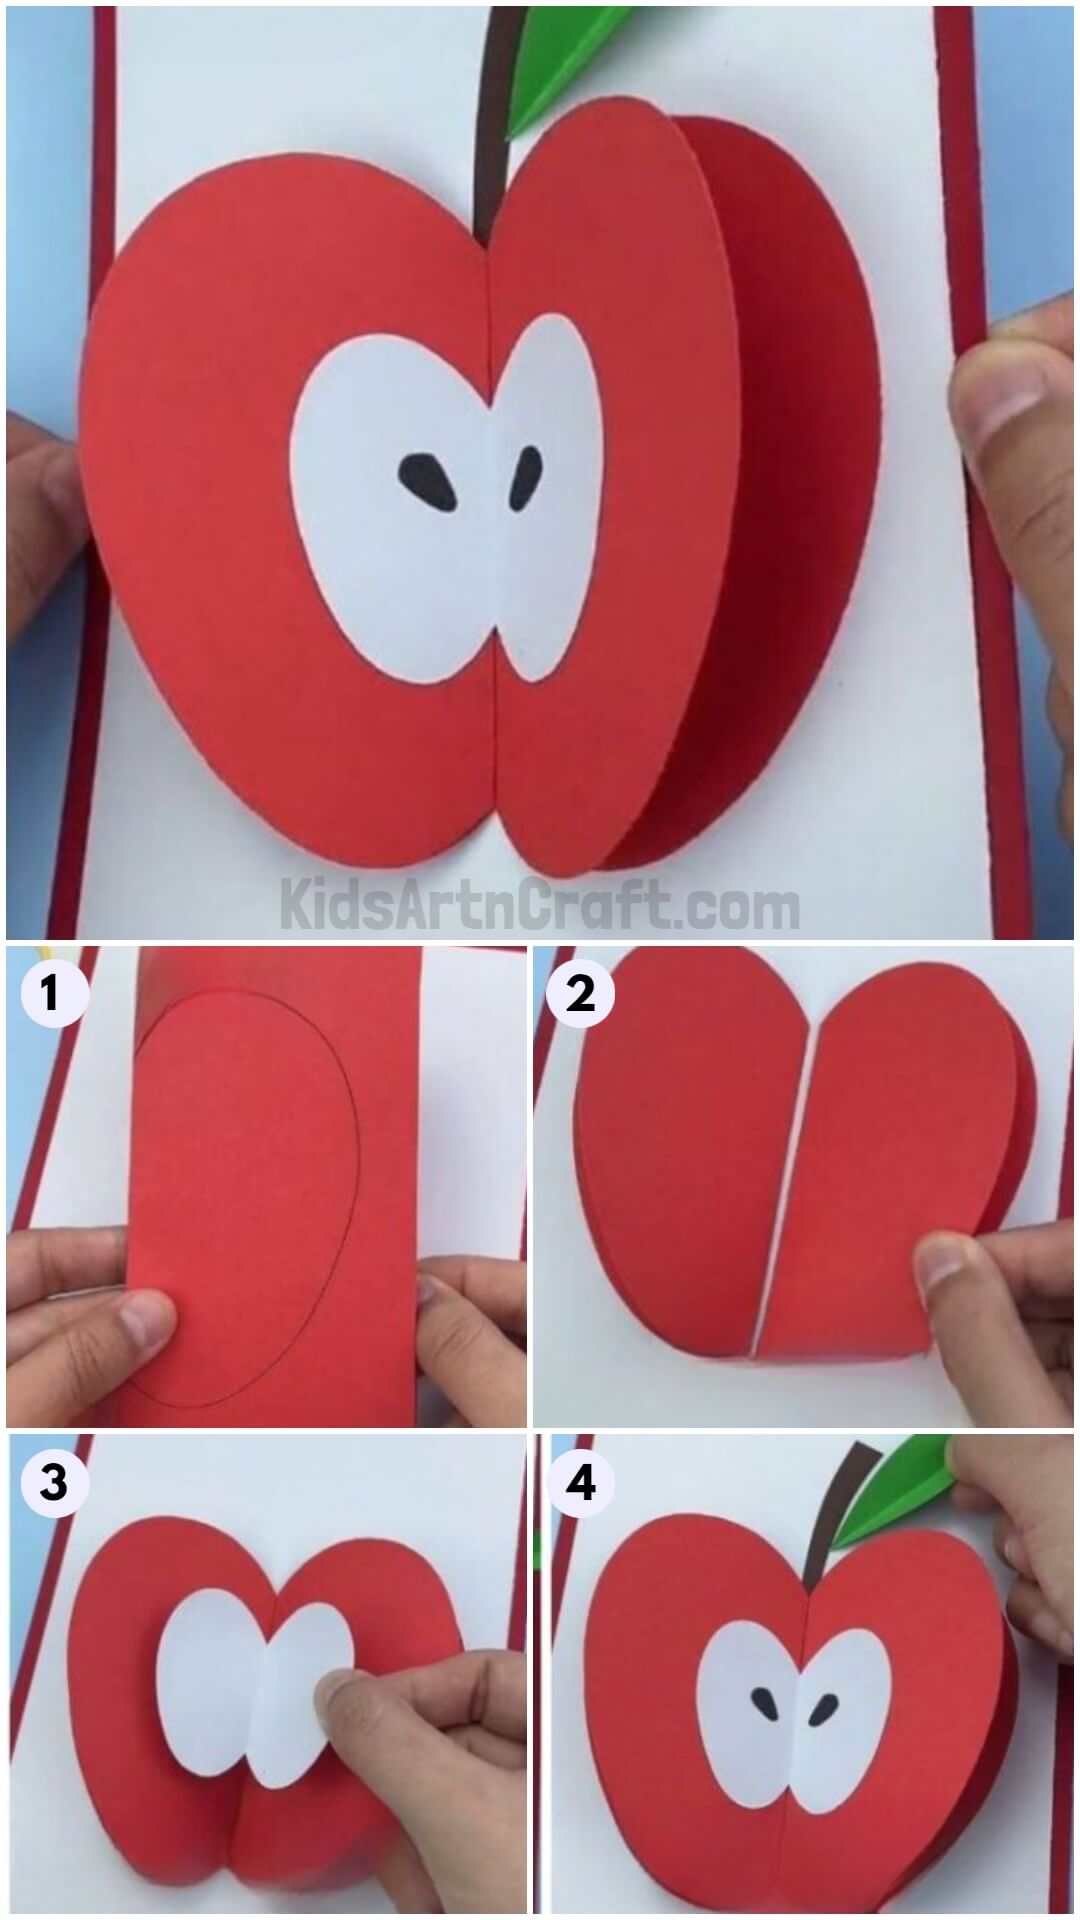 How to Make 3D Apple Paper Card - Step by Step Instructions